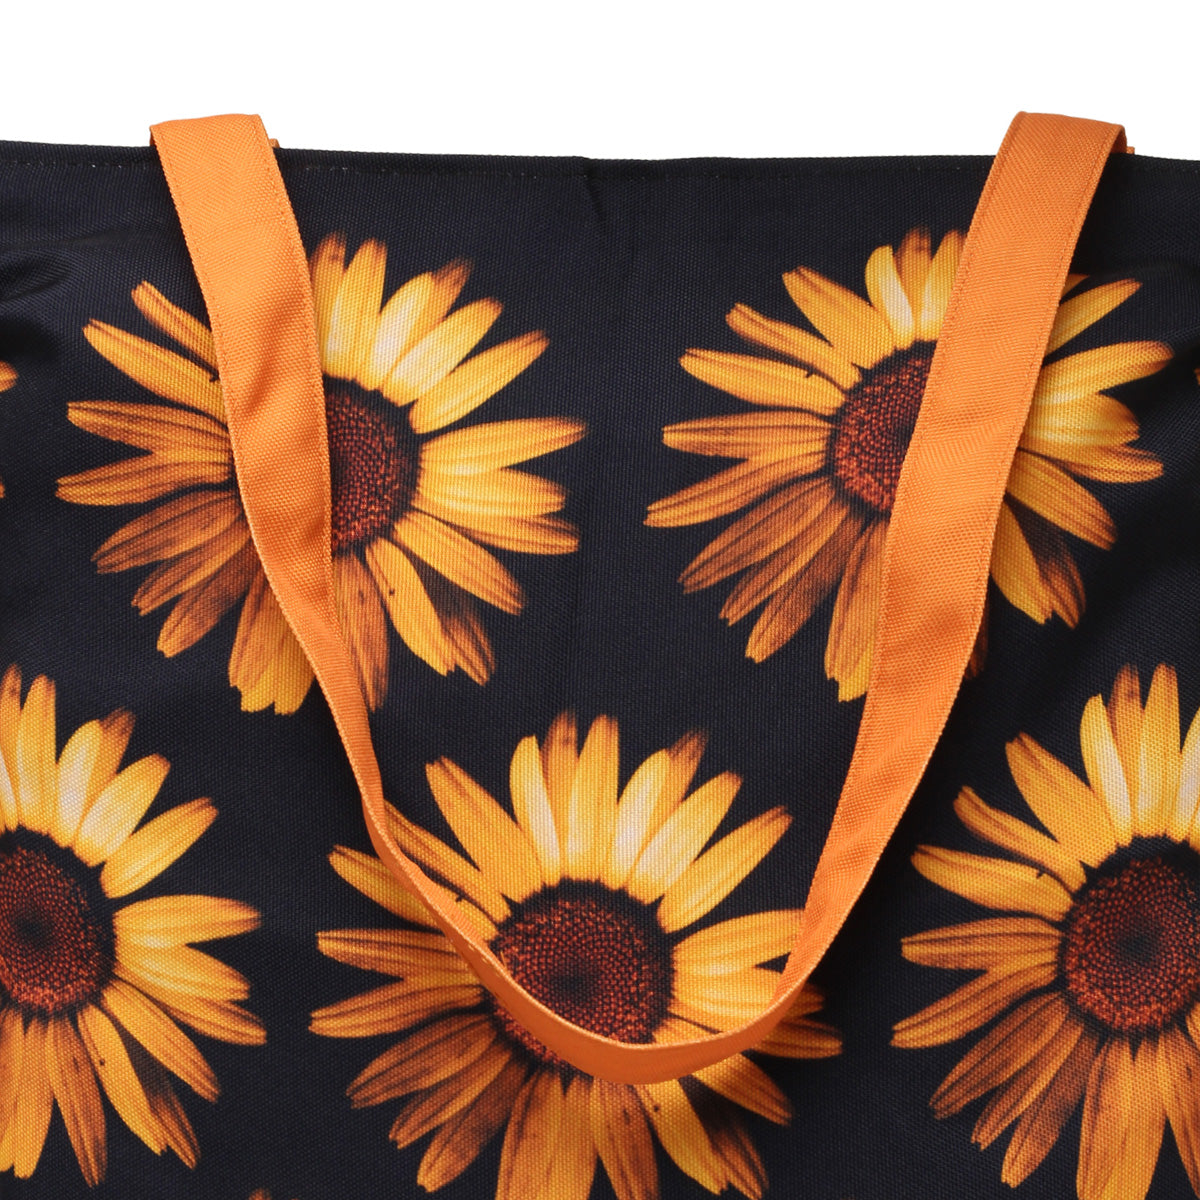 Stylish tote bag in black and orange with sunflower design.